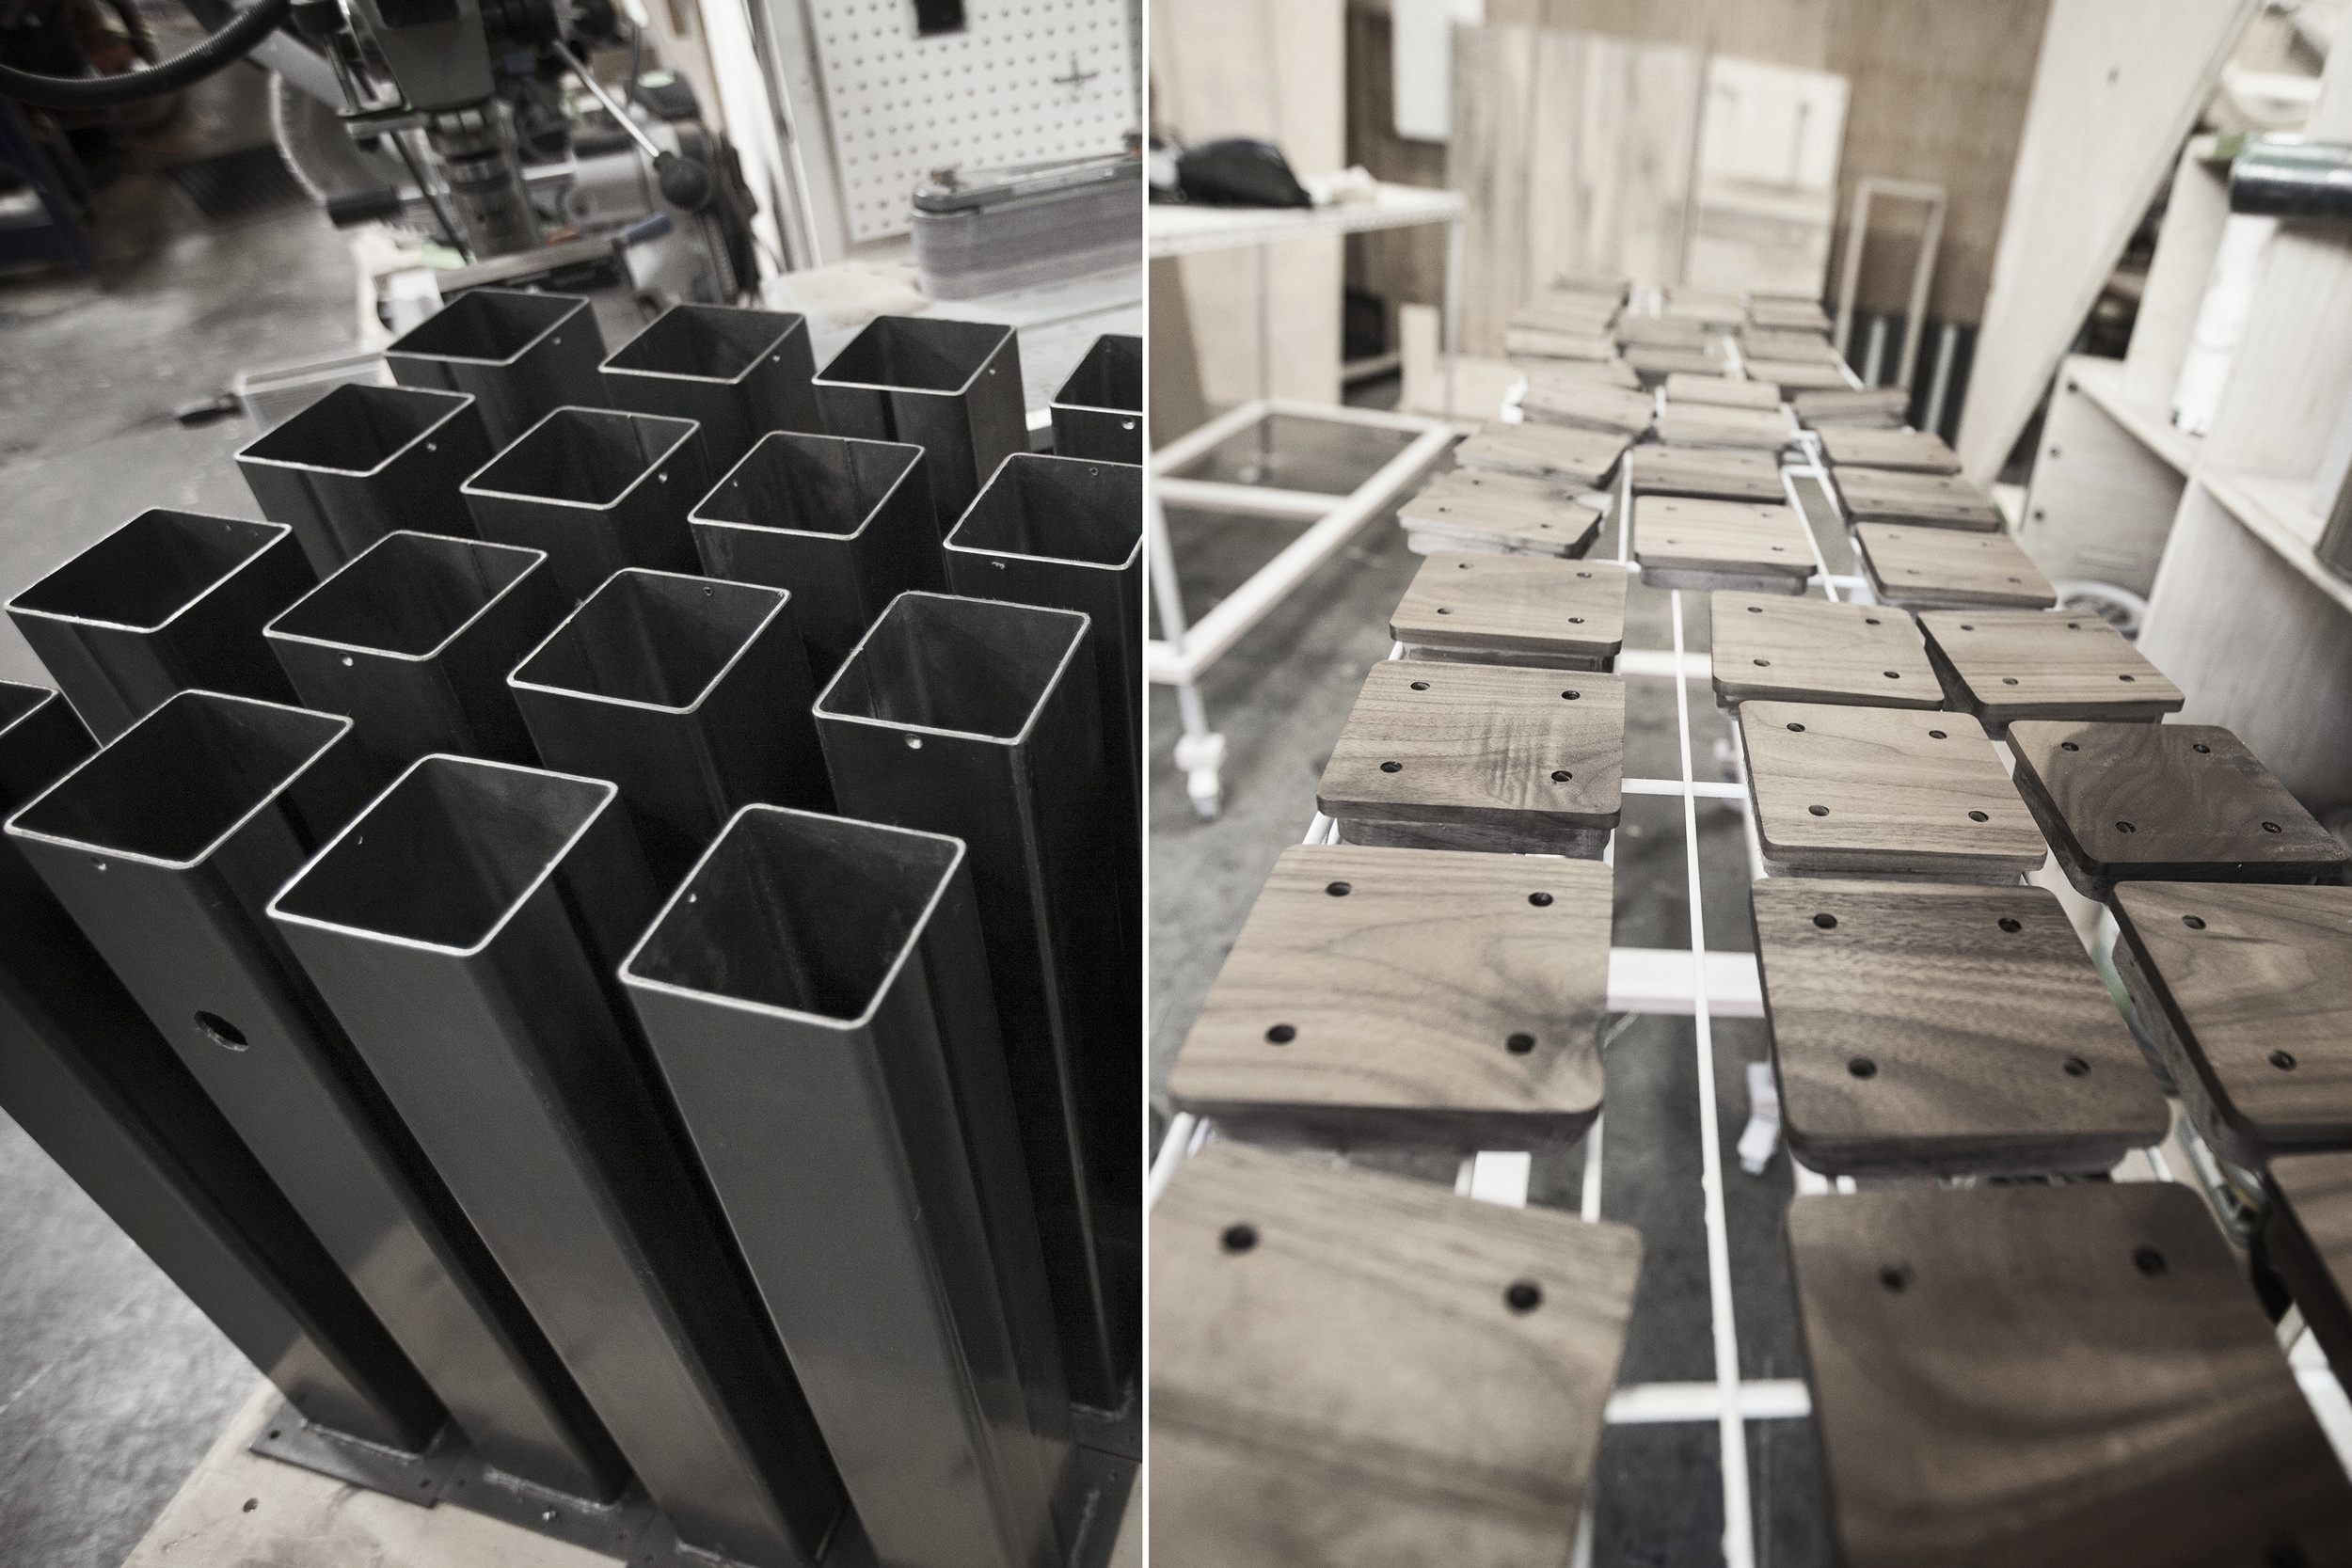  Table legs parts ready for assembly at our in-house shop. 